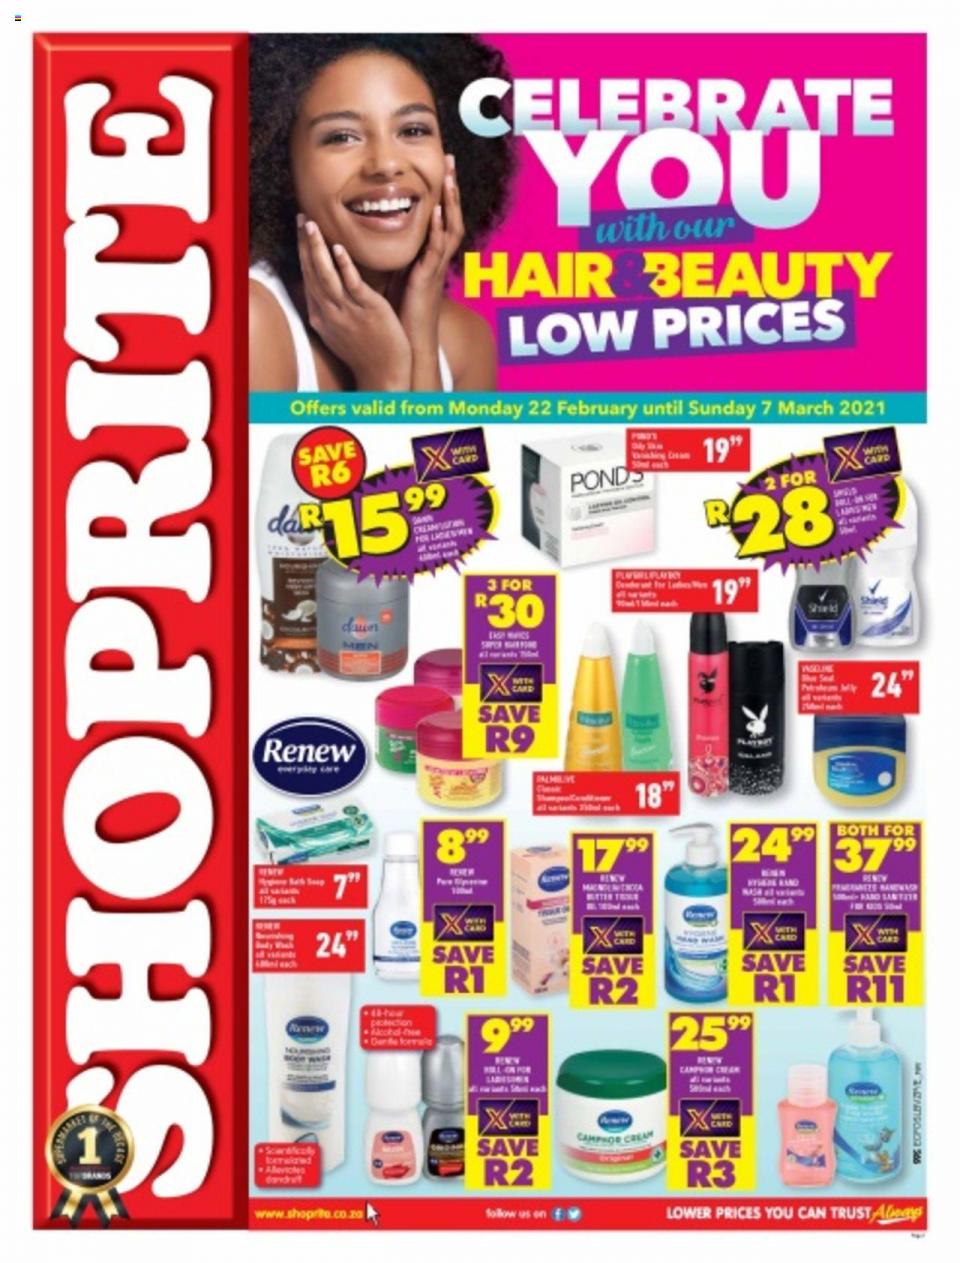 Shoprite Specials Hair & Beauty Sale 22 February 2021